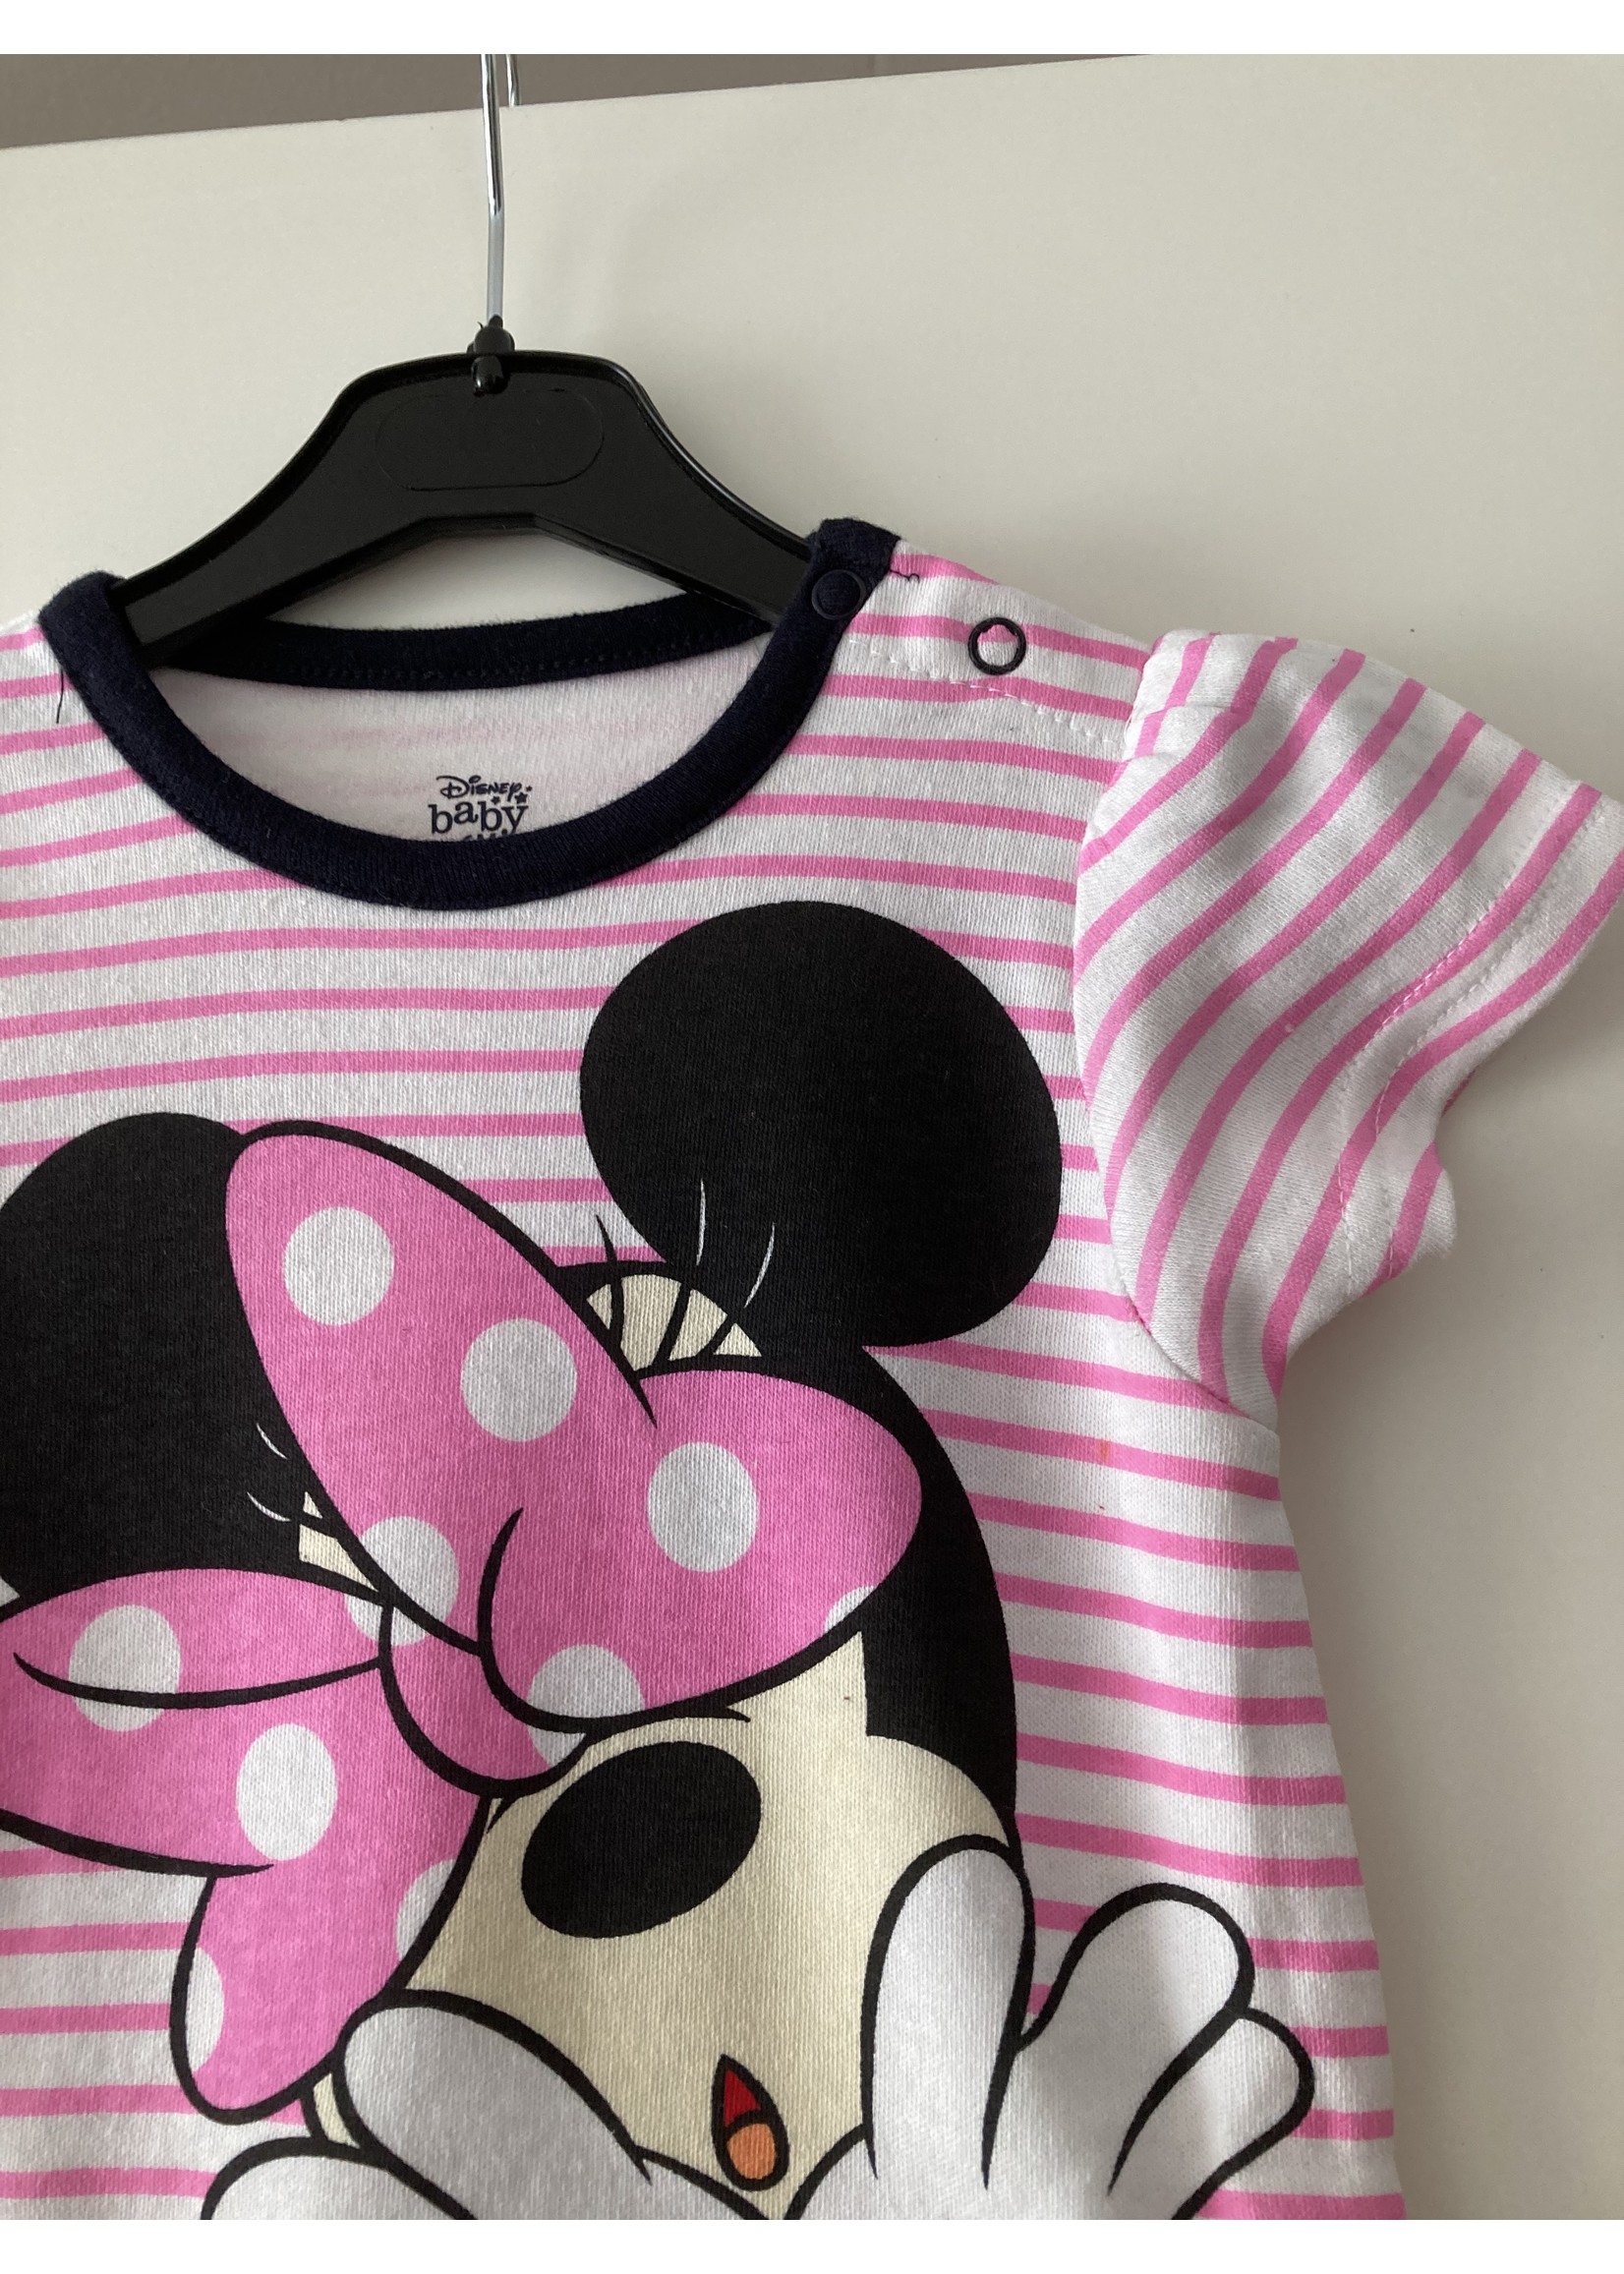 Disney baby Minnie Mouse romper from Disney baby black